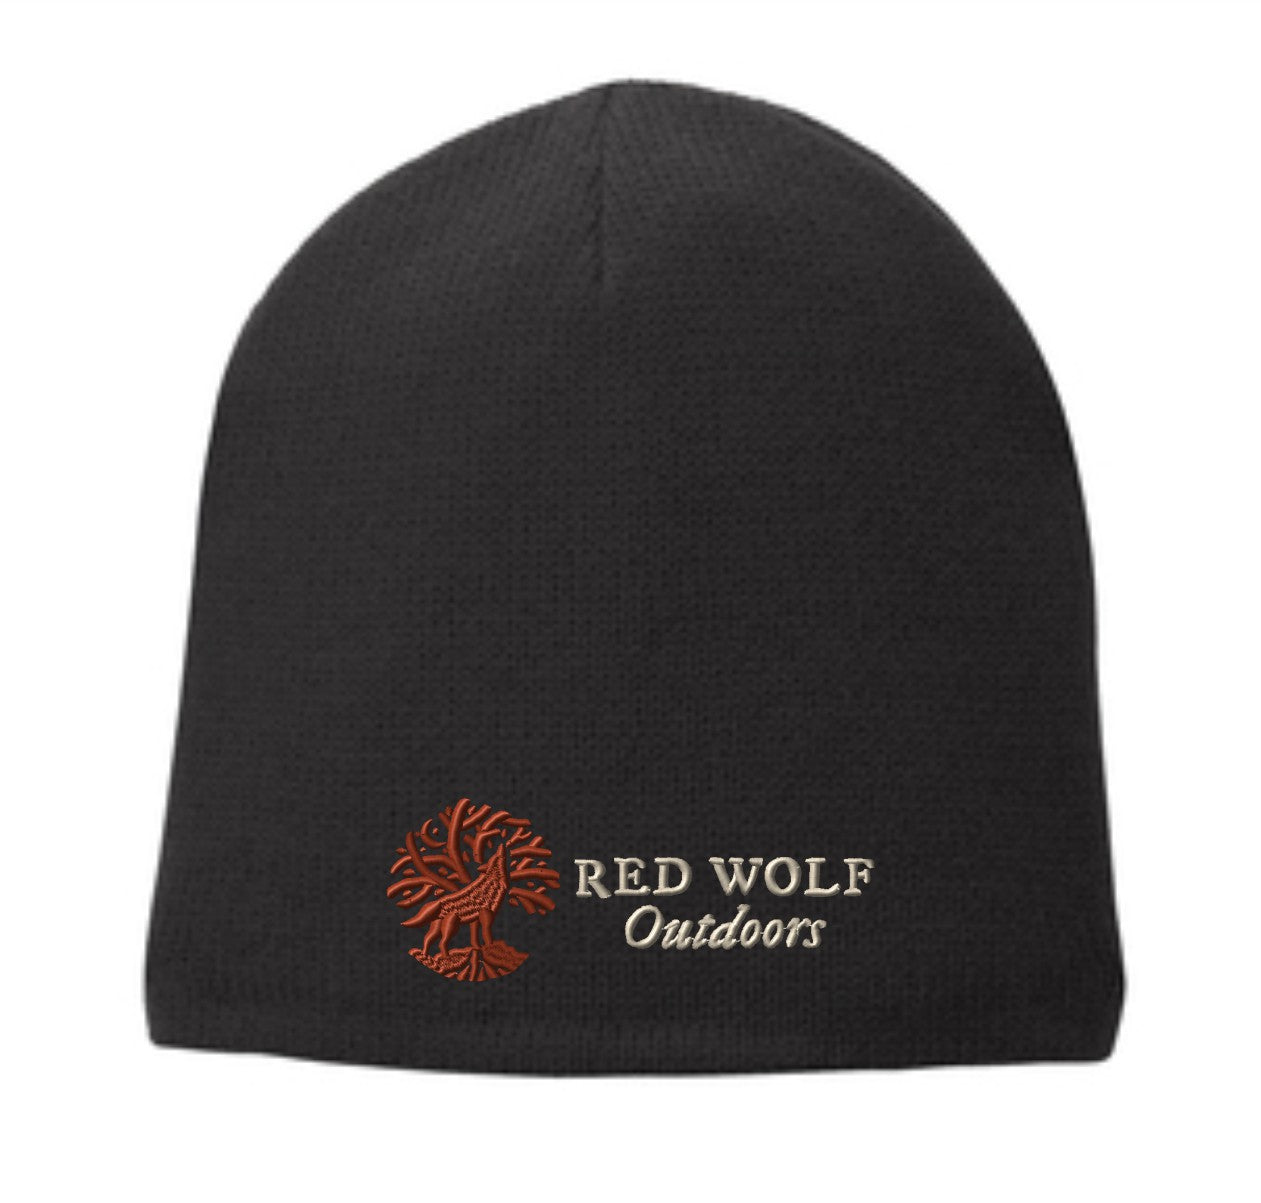 Red Wolf Outdoors Signature Beanie Hat